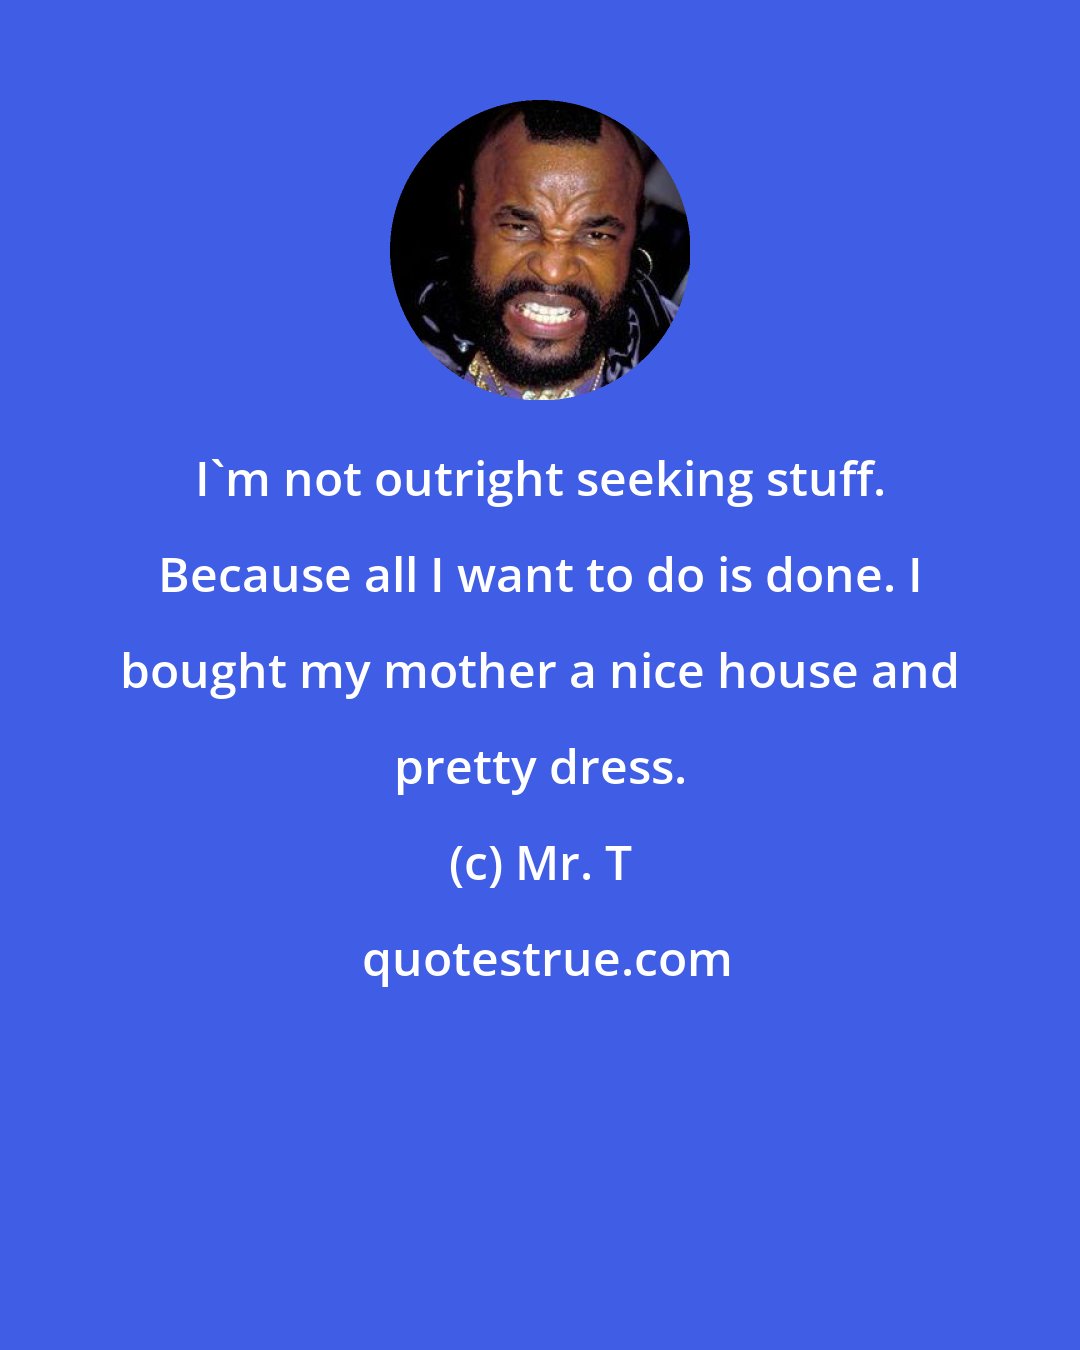 Mr. T: I'm not outright seeking stuff. Because all I want to do is done. I bought my mother a nice house and pretty dress.